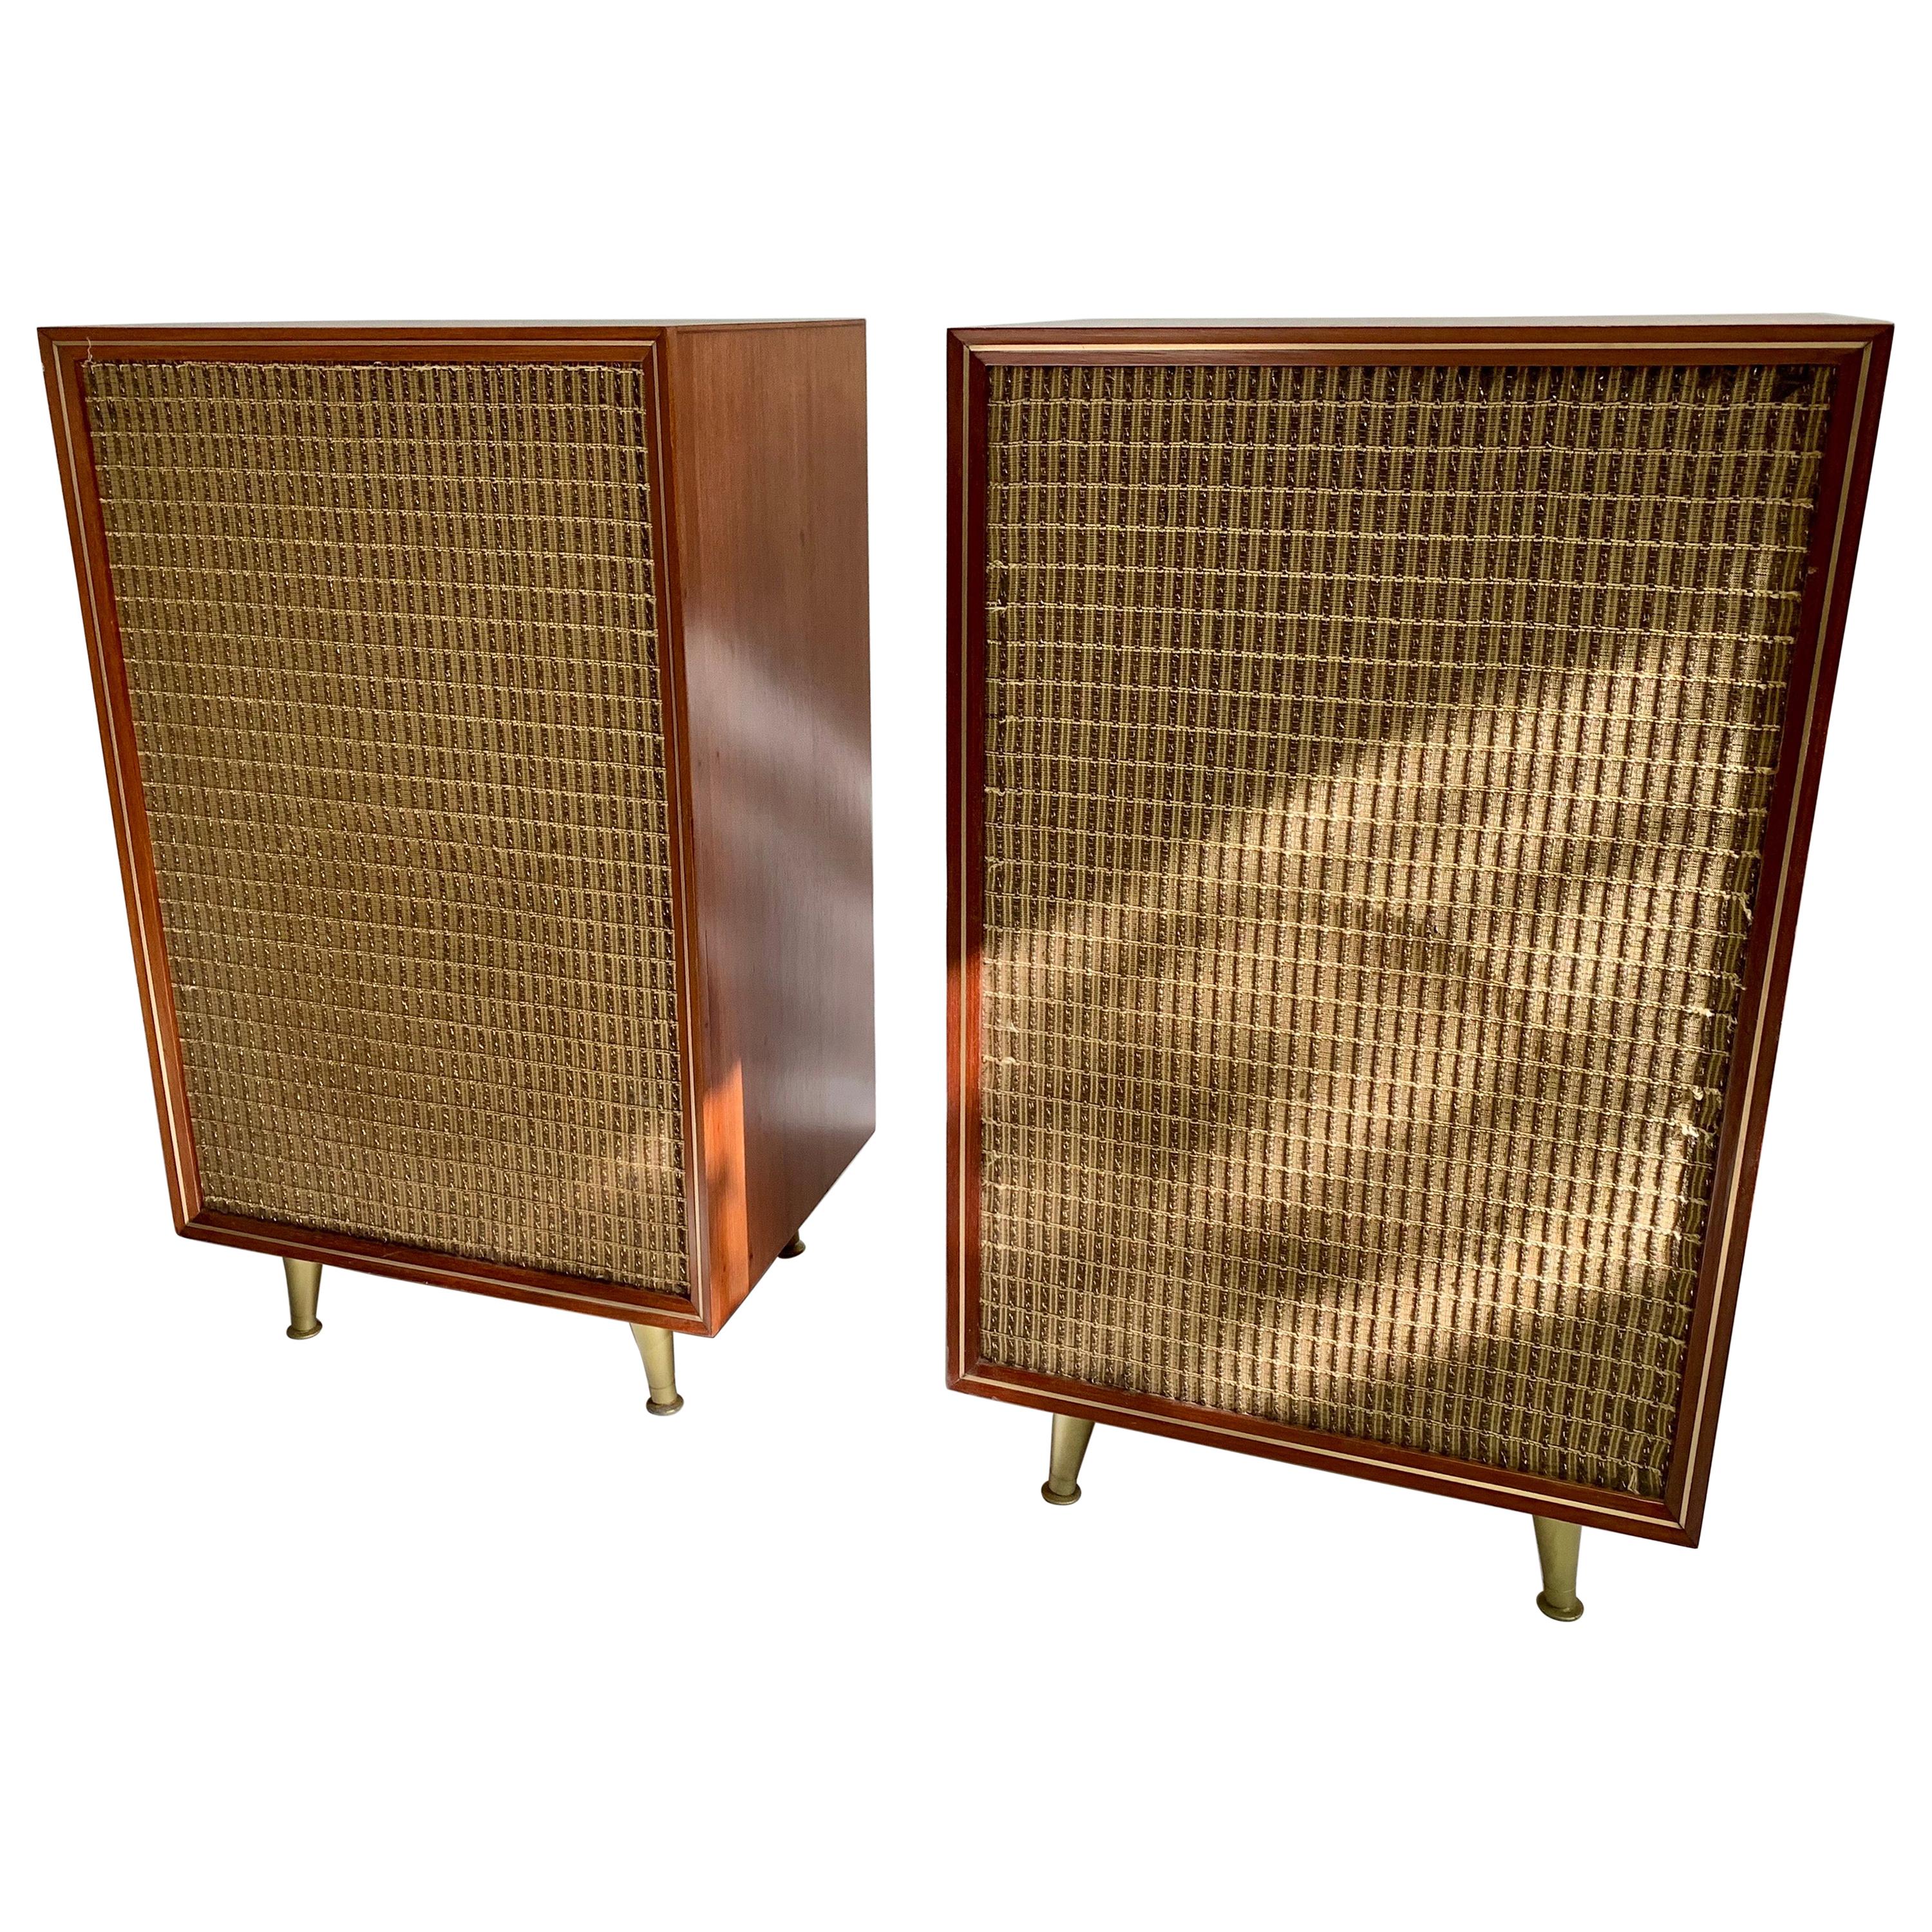 Pair of Mid-Century Modern Electro-Voice Stereo Cabinet Speakers